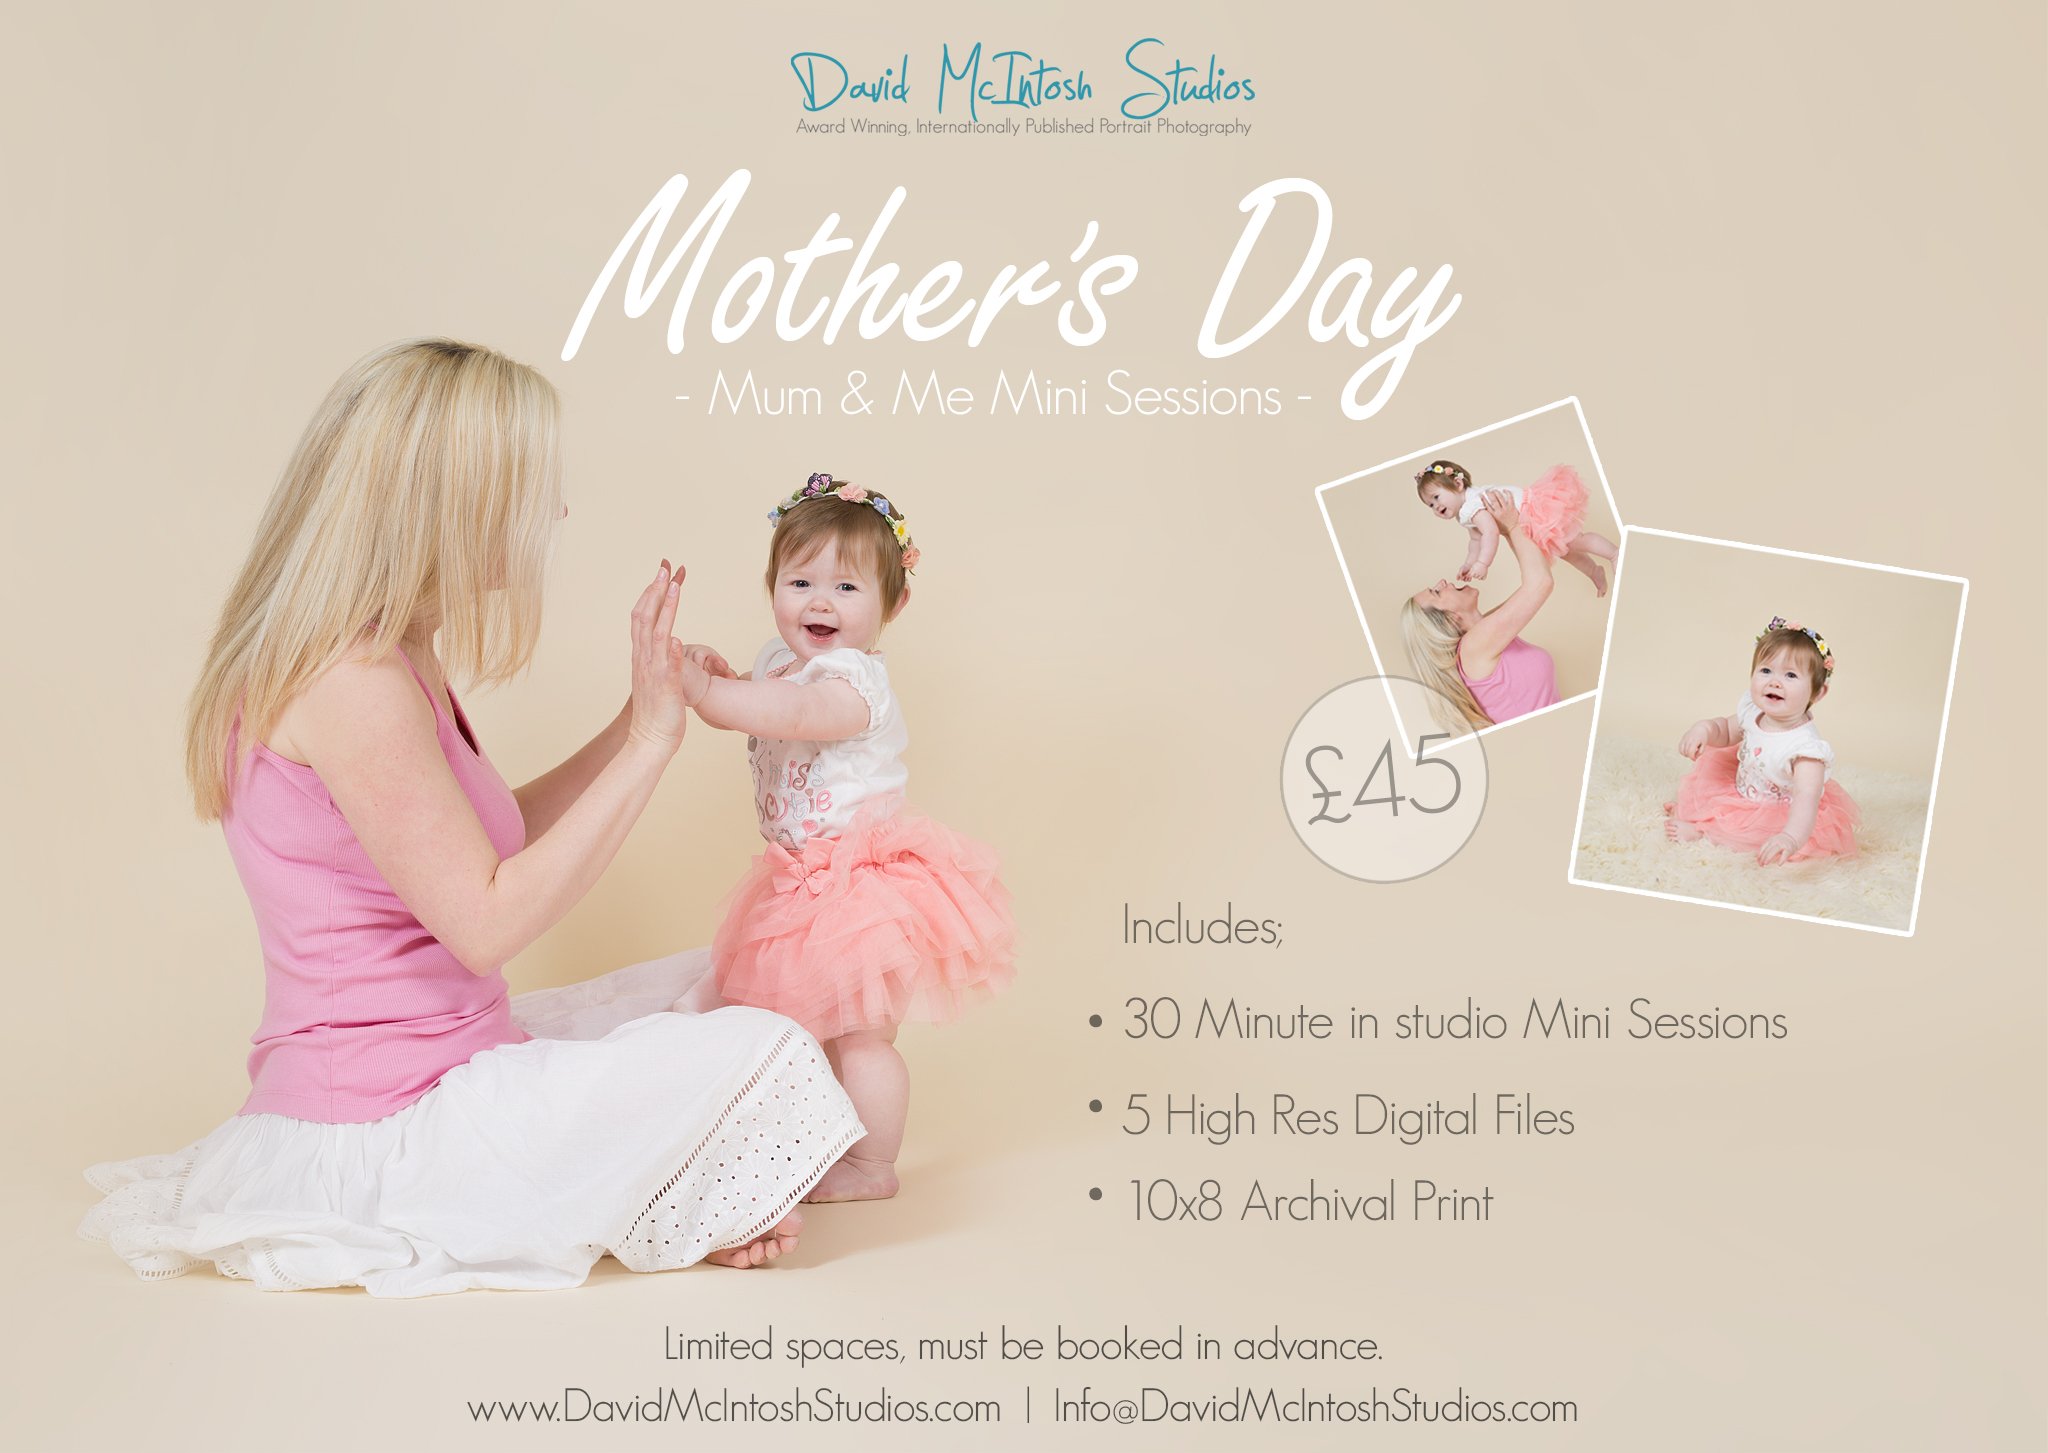 Mothers Day Poster.jpg